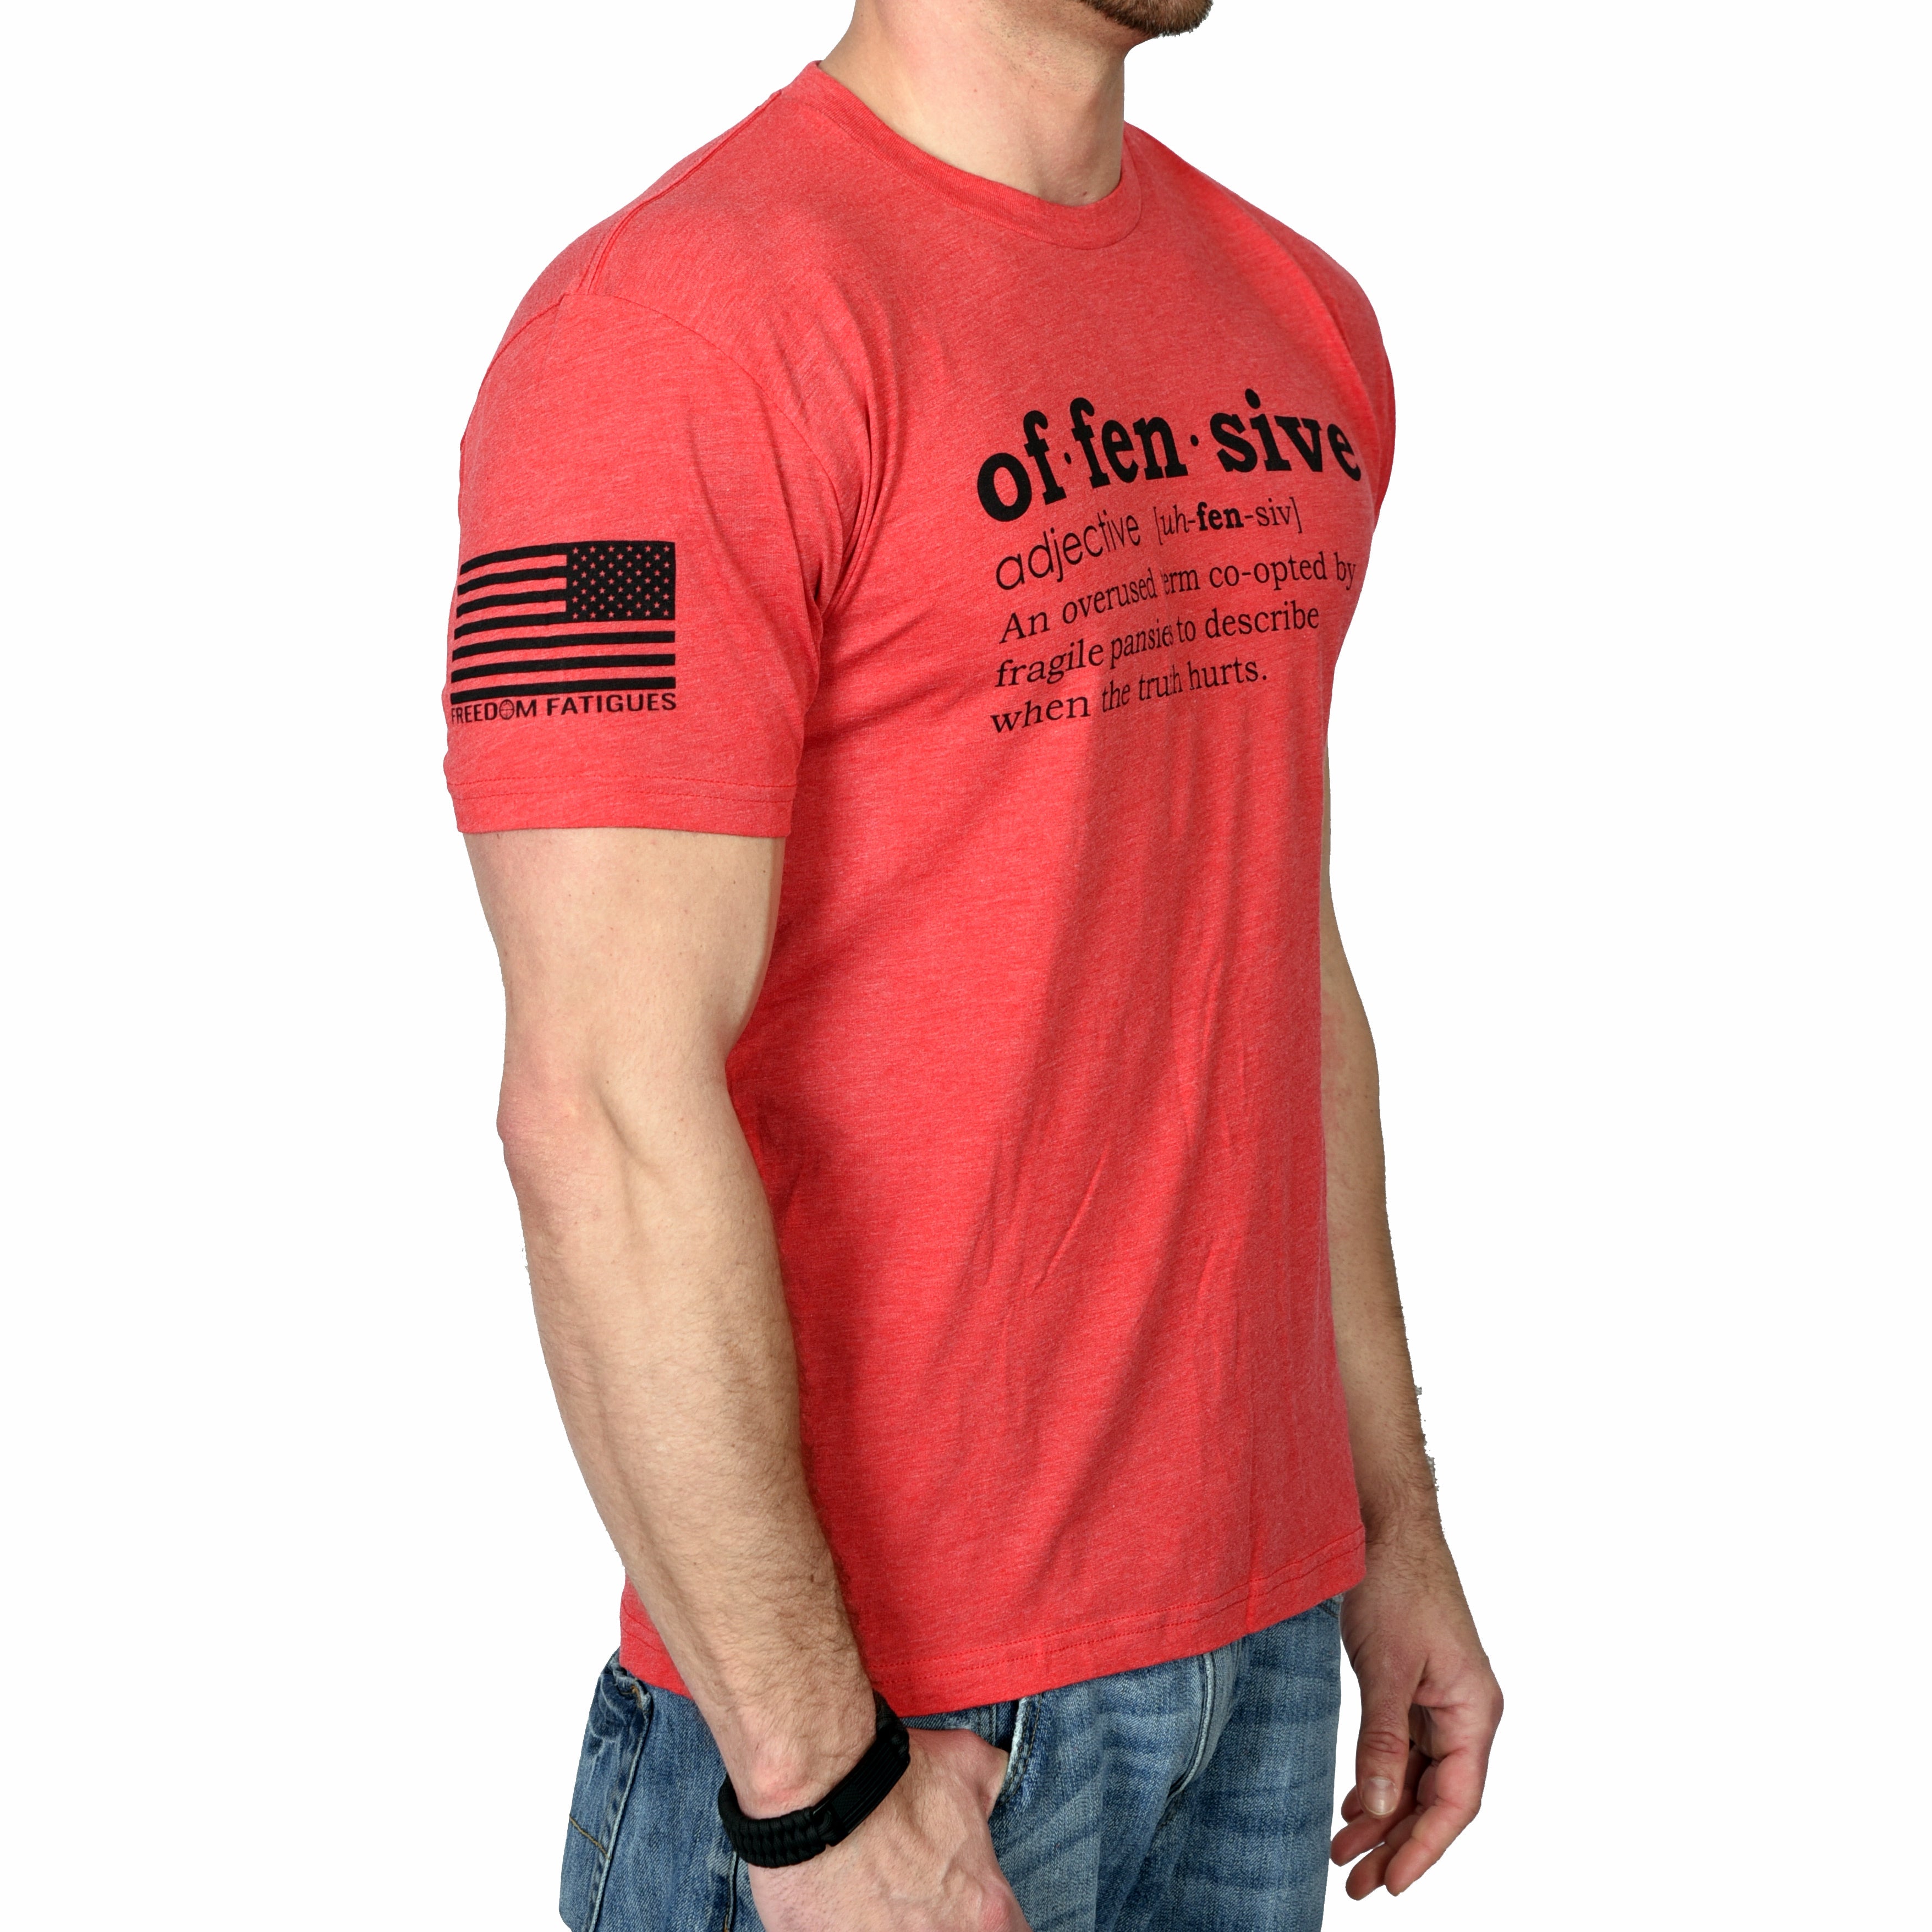 Men's Offensive Defined T-Shirt (Red)